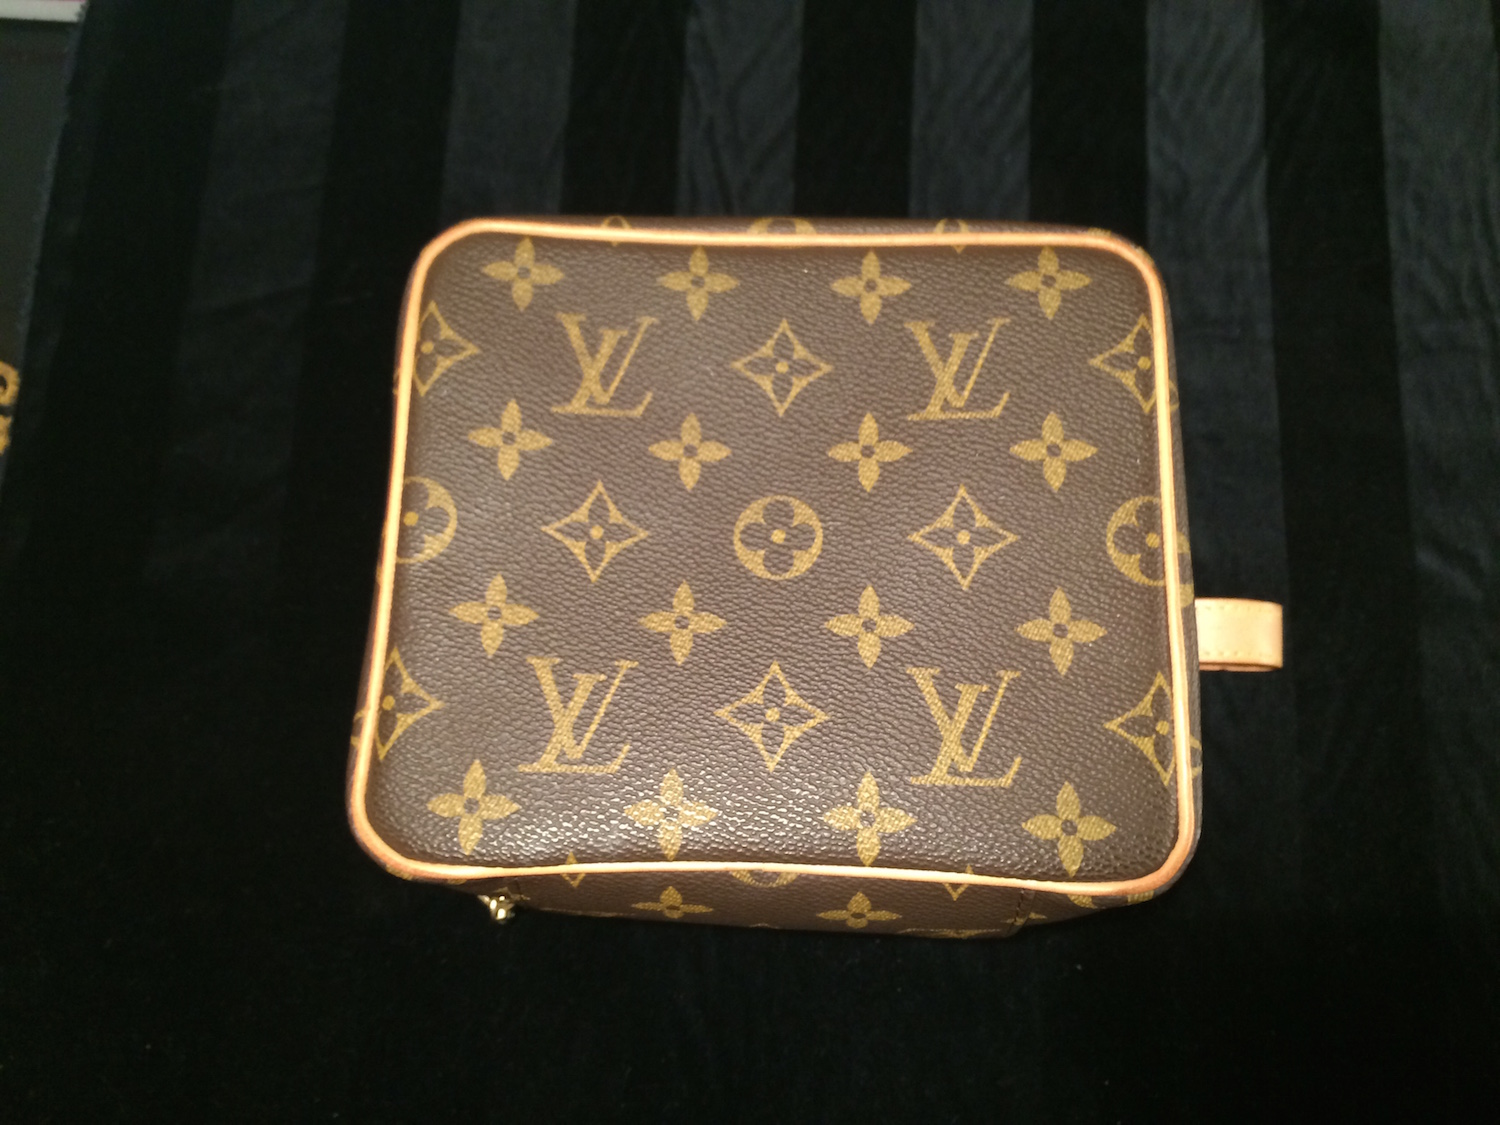 Louis Vuitton Square Bag - 10 For Sale on 1stDibs